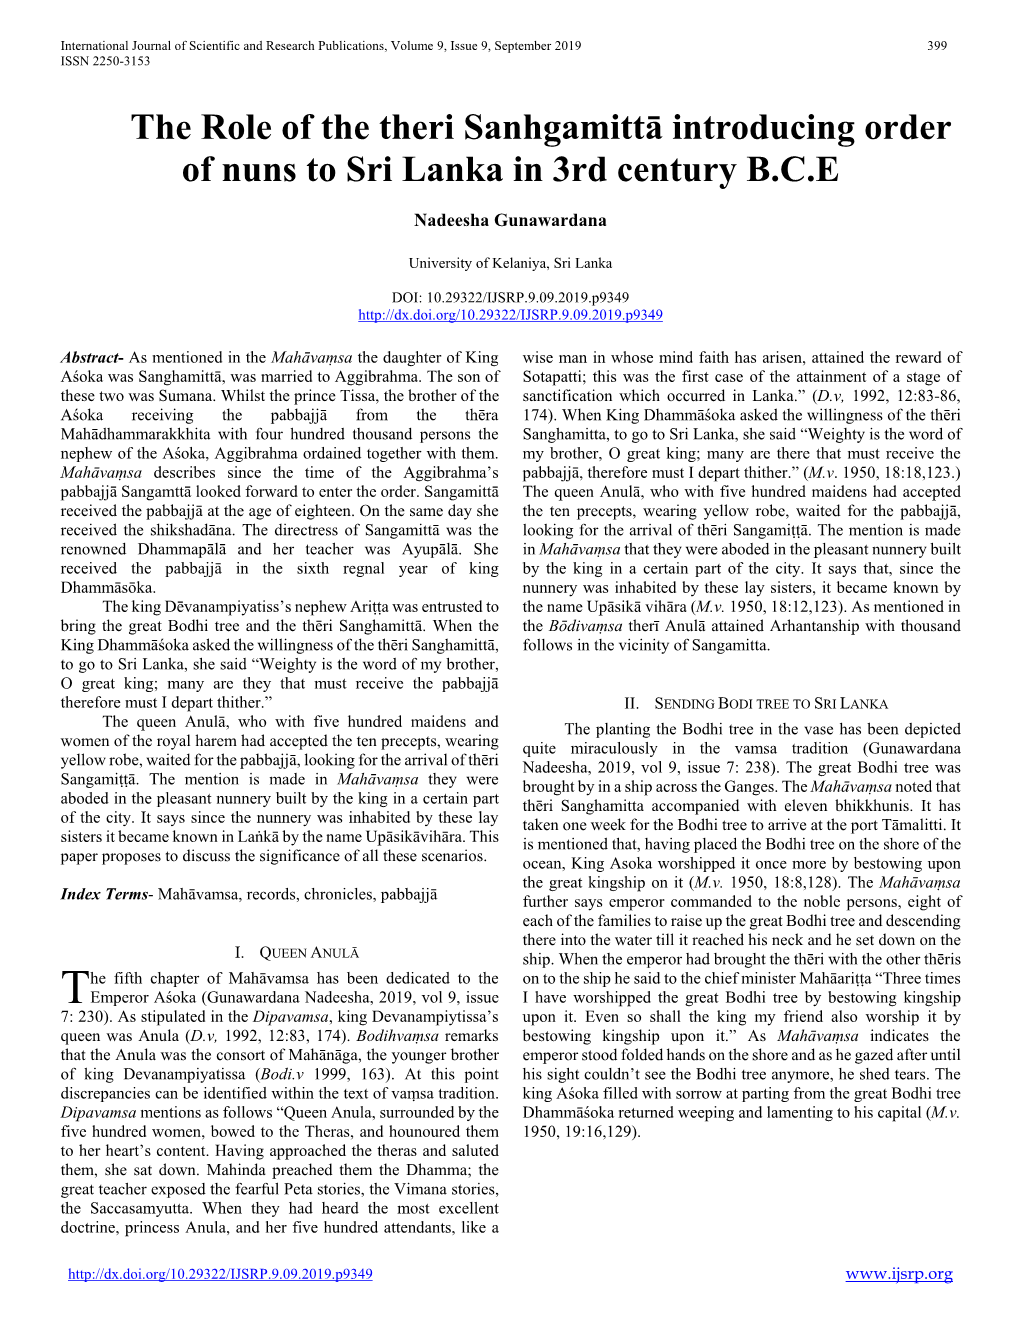 The Role of the Theri Sanhgamittā Introducing Order of Nuns to Sri Lanka in 3Rd Century B.C.E